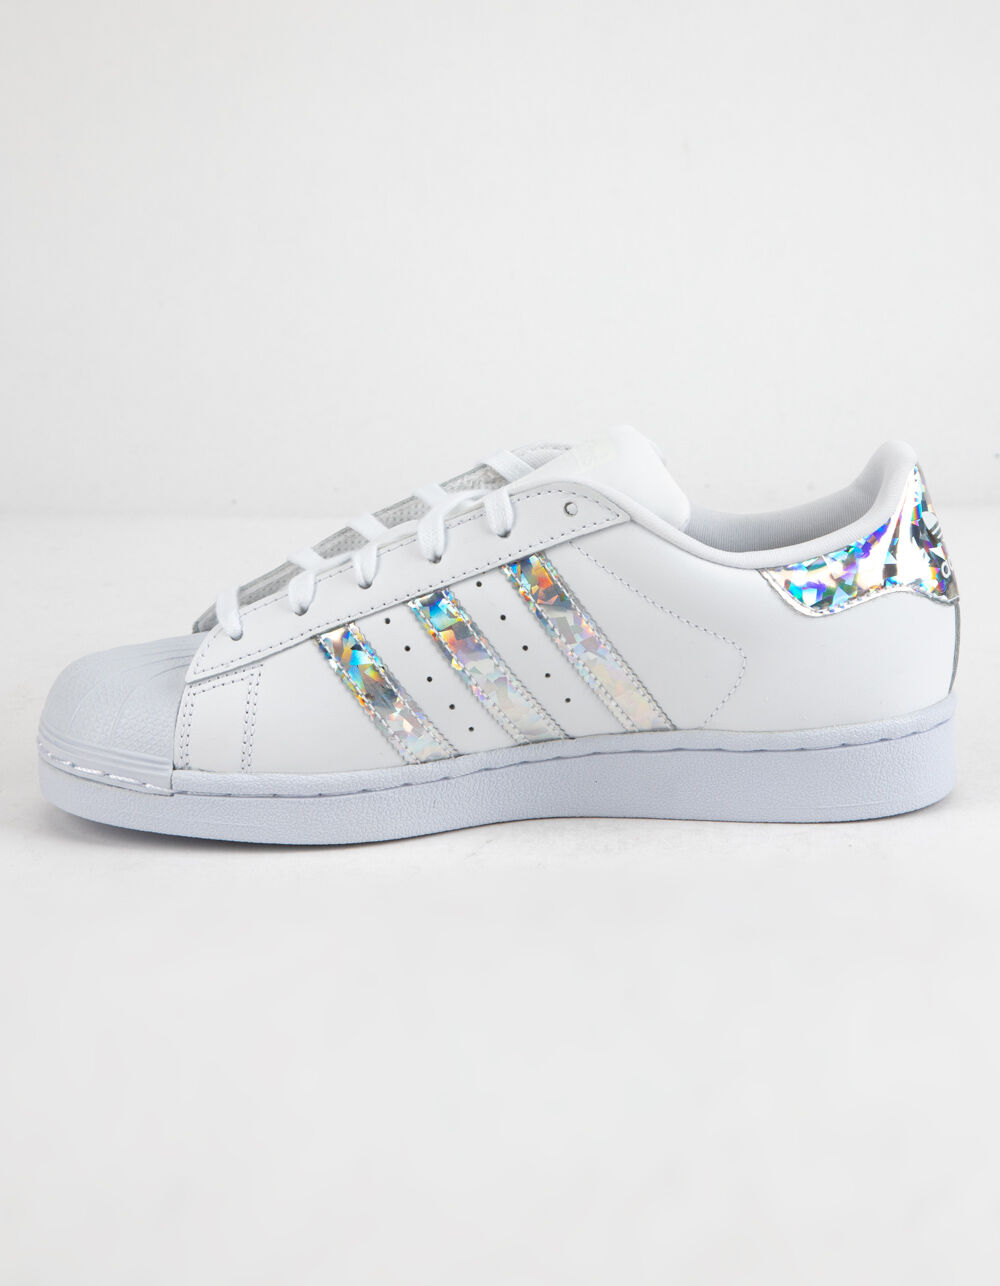 combustible estera kiwi ADIDAS Superstar Holographic Girls Shoes - WHITE/SILVER | Tillys